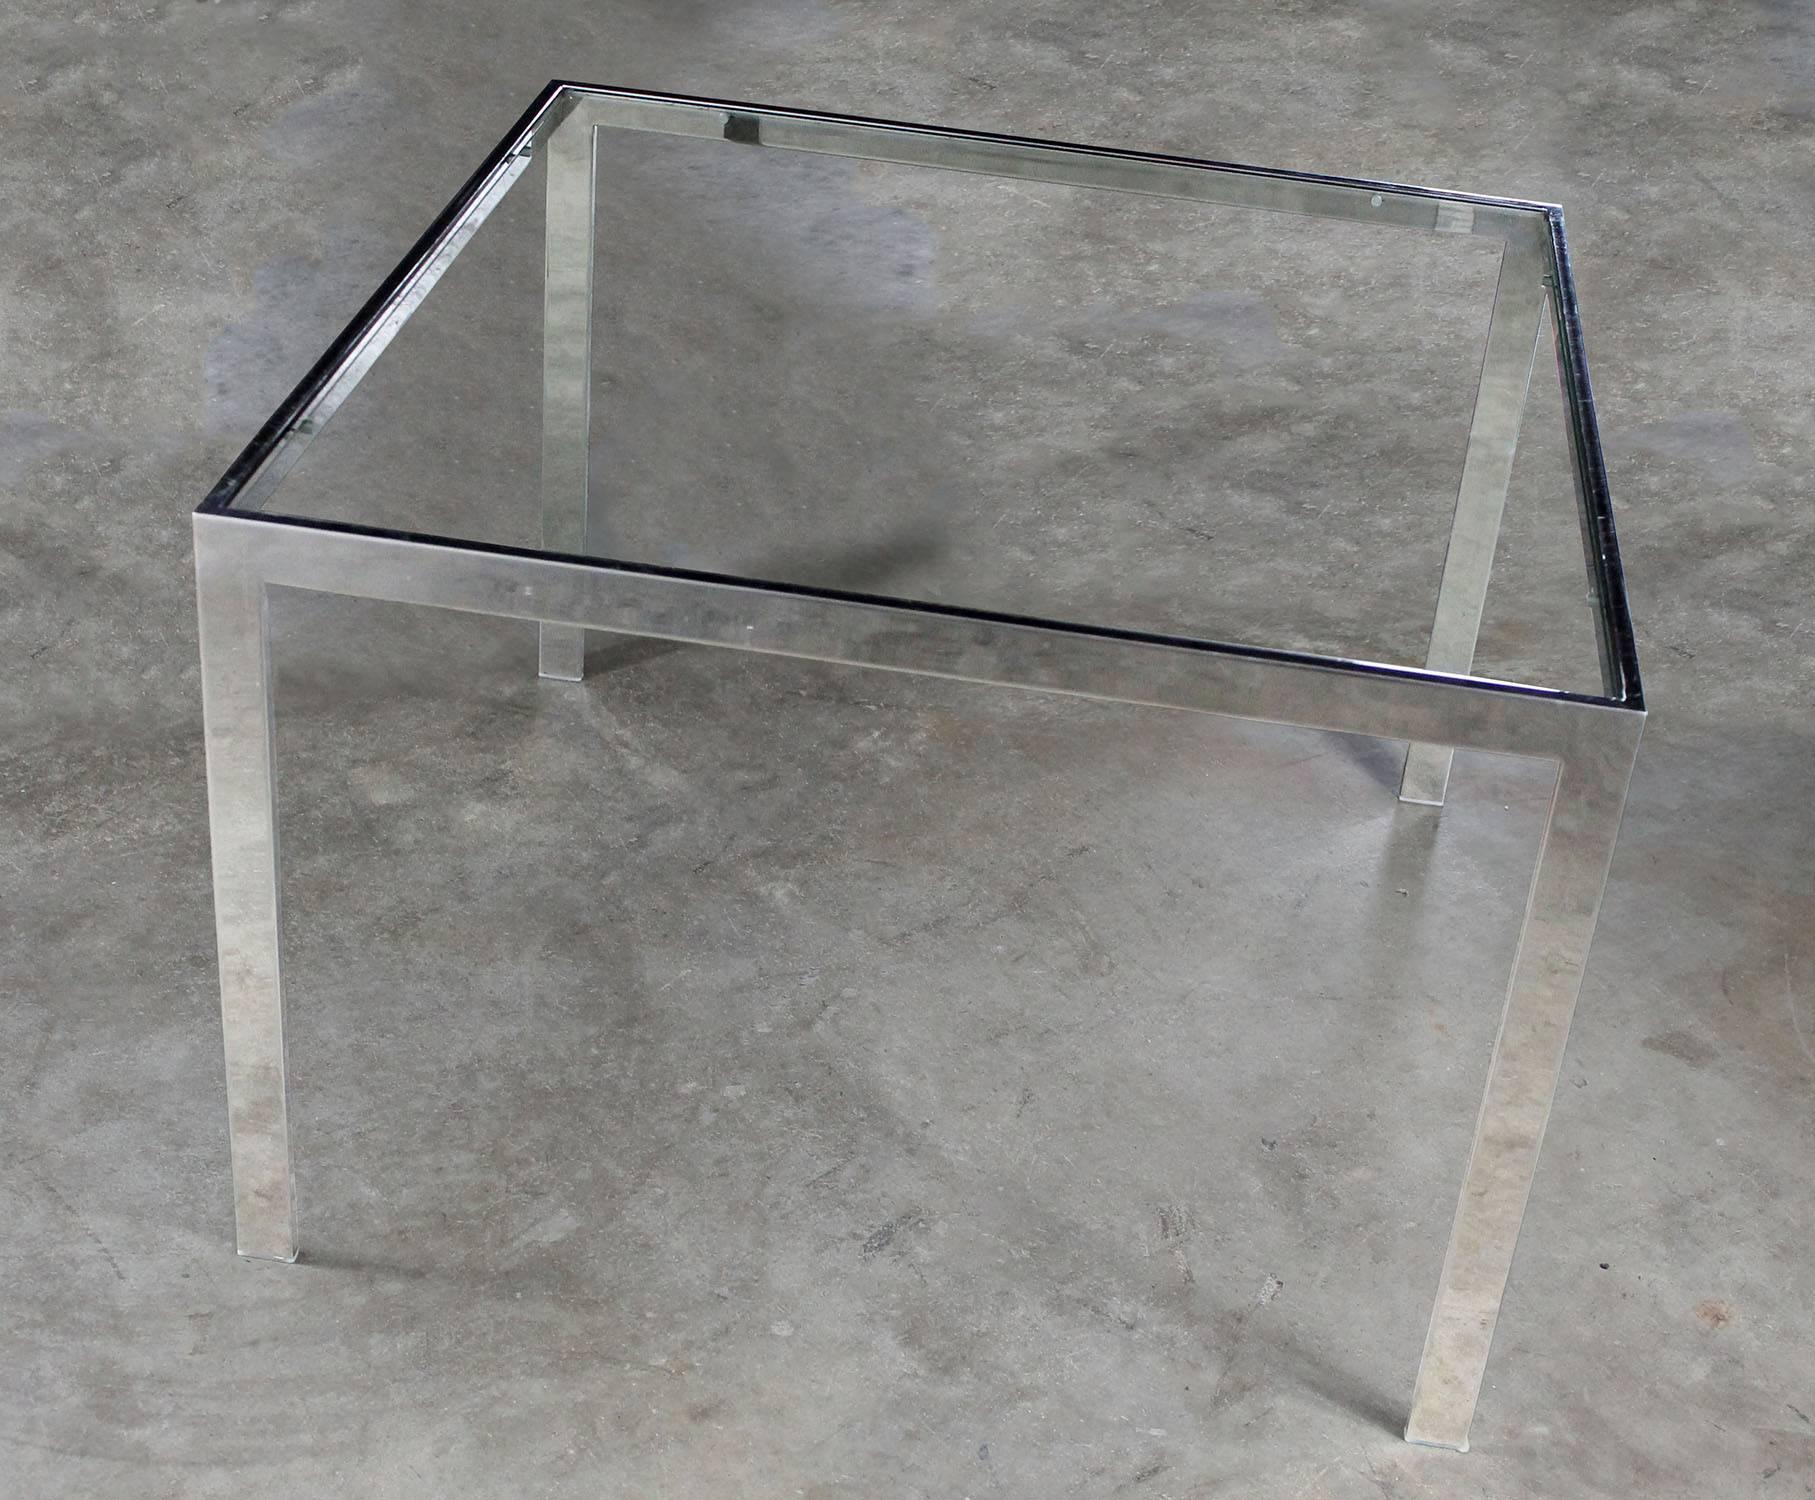 Handsome chrome and glass Parsons style end table attributed to Milo Baughman, circa 1970. In wonderful vintage condition with no outstanding flaws we have been able to detect. UPDATE: We have noticed there are small chips in the edges of the glass